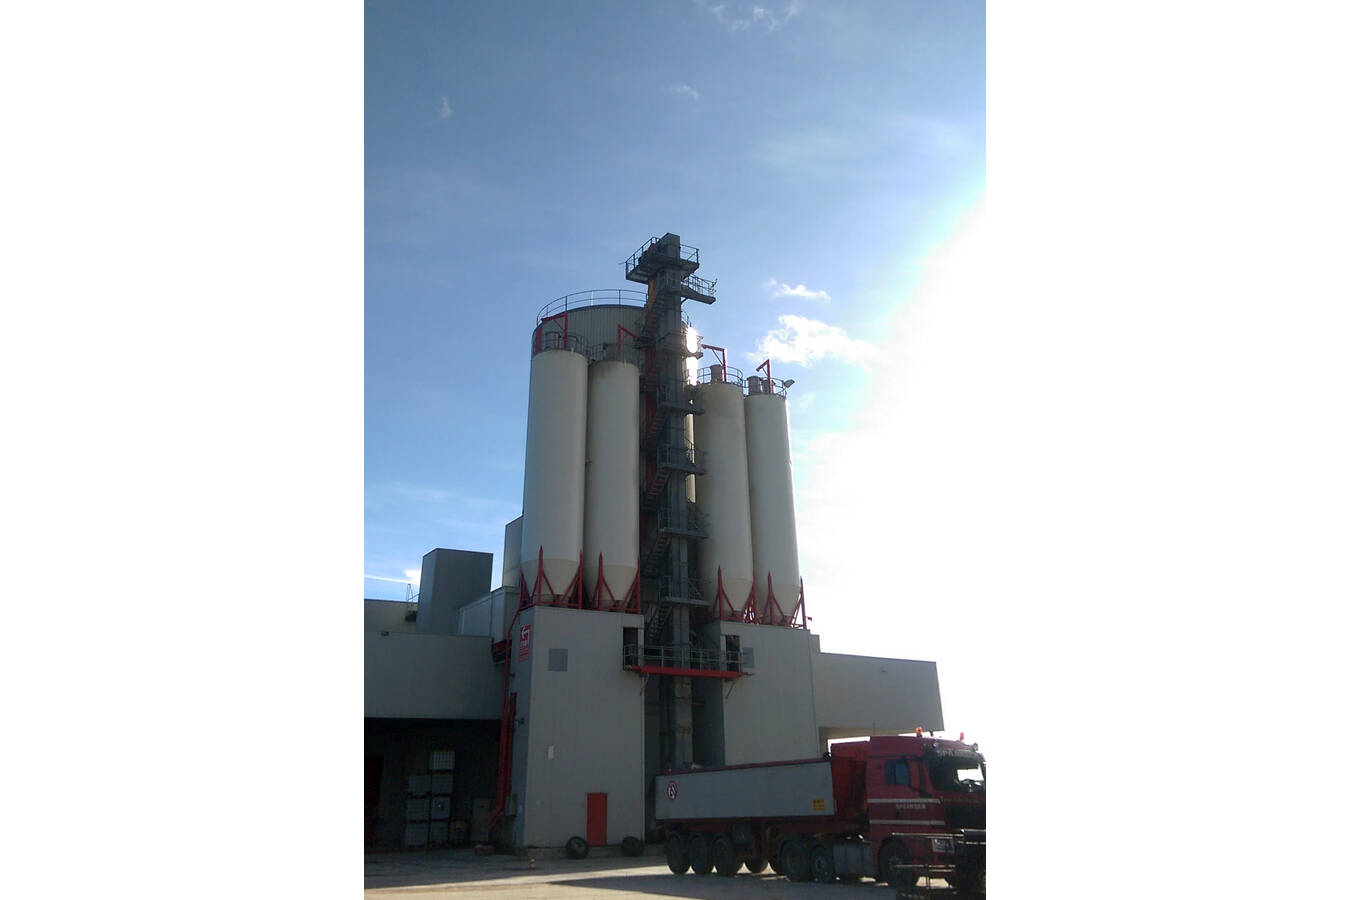 Cost savings through elevator overhaul Spaansen Bouwsystemen in Harlingen has achieved significant cost savings with a complete elevator overhaul. Processing is more efficient and long lasting, durable components are used.